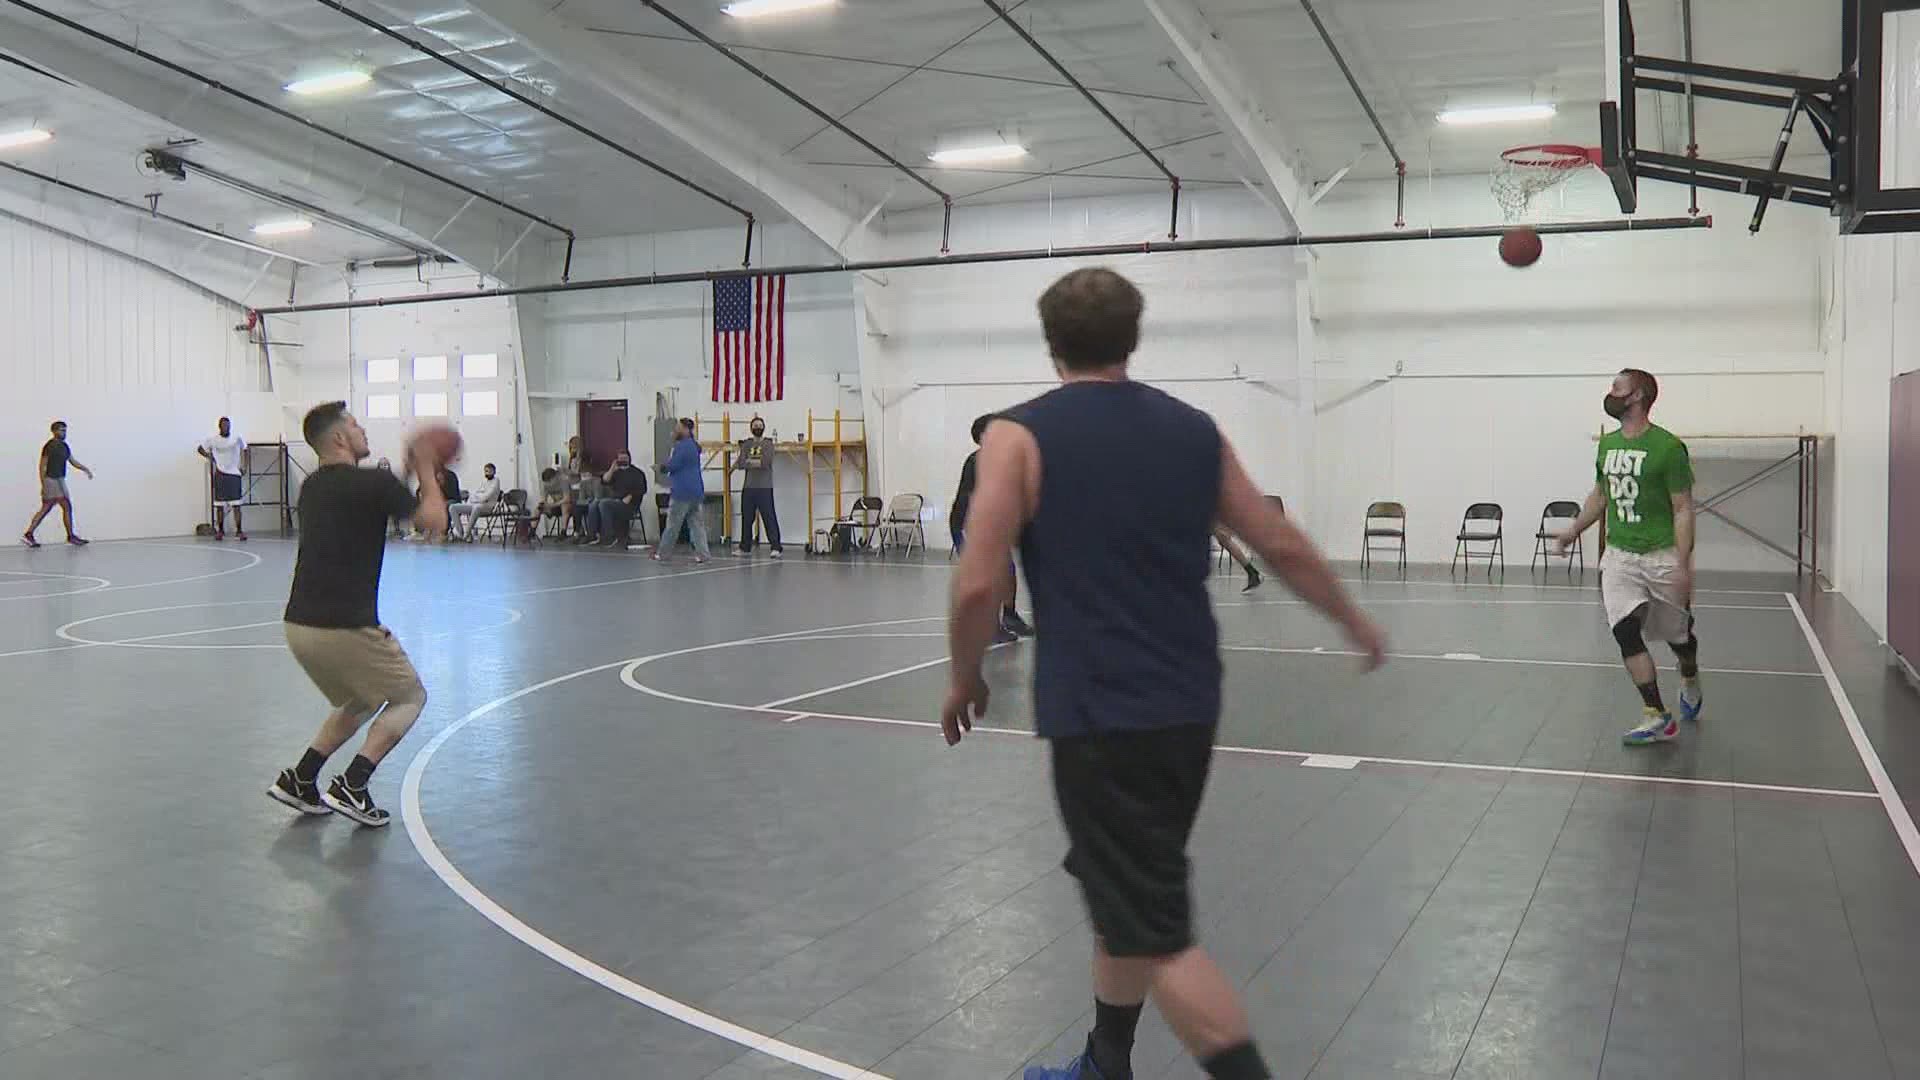 Open tryouts for a semi-pro basketball team were held at the Midcoast Athletics Center in Warren.